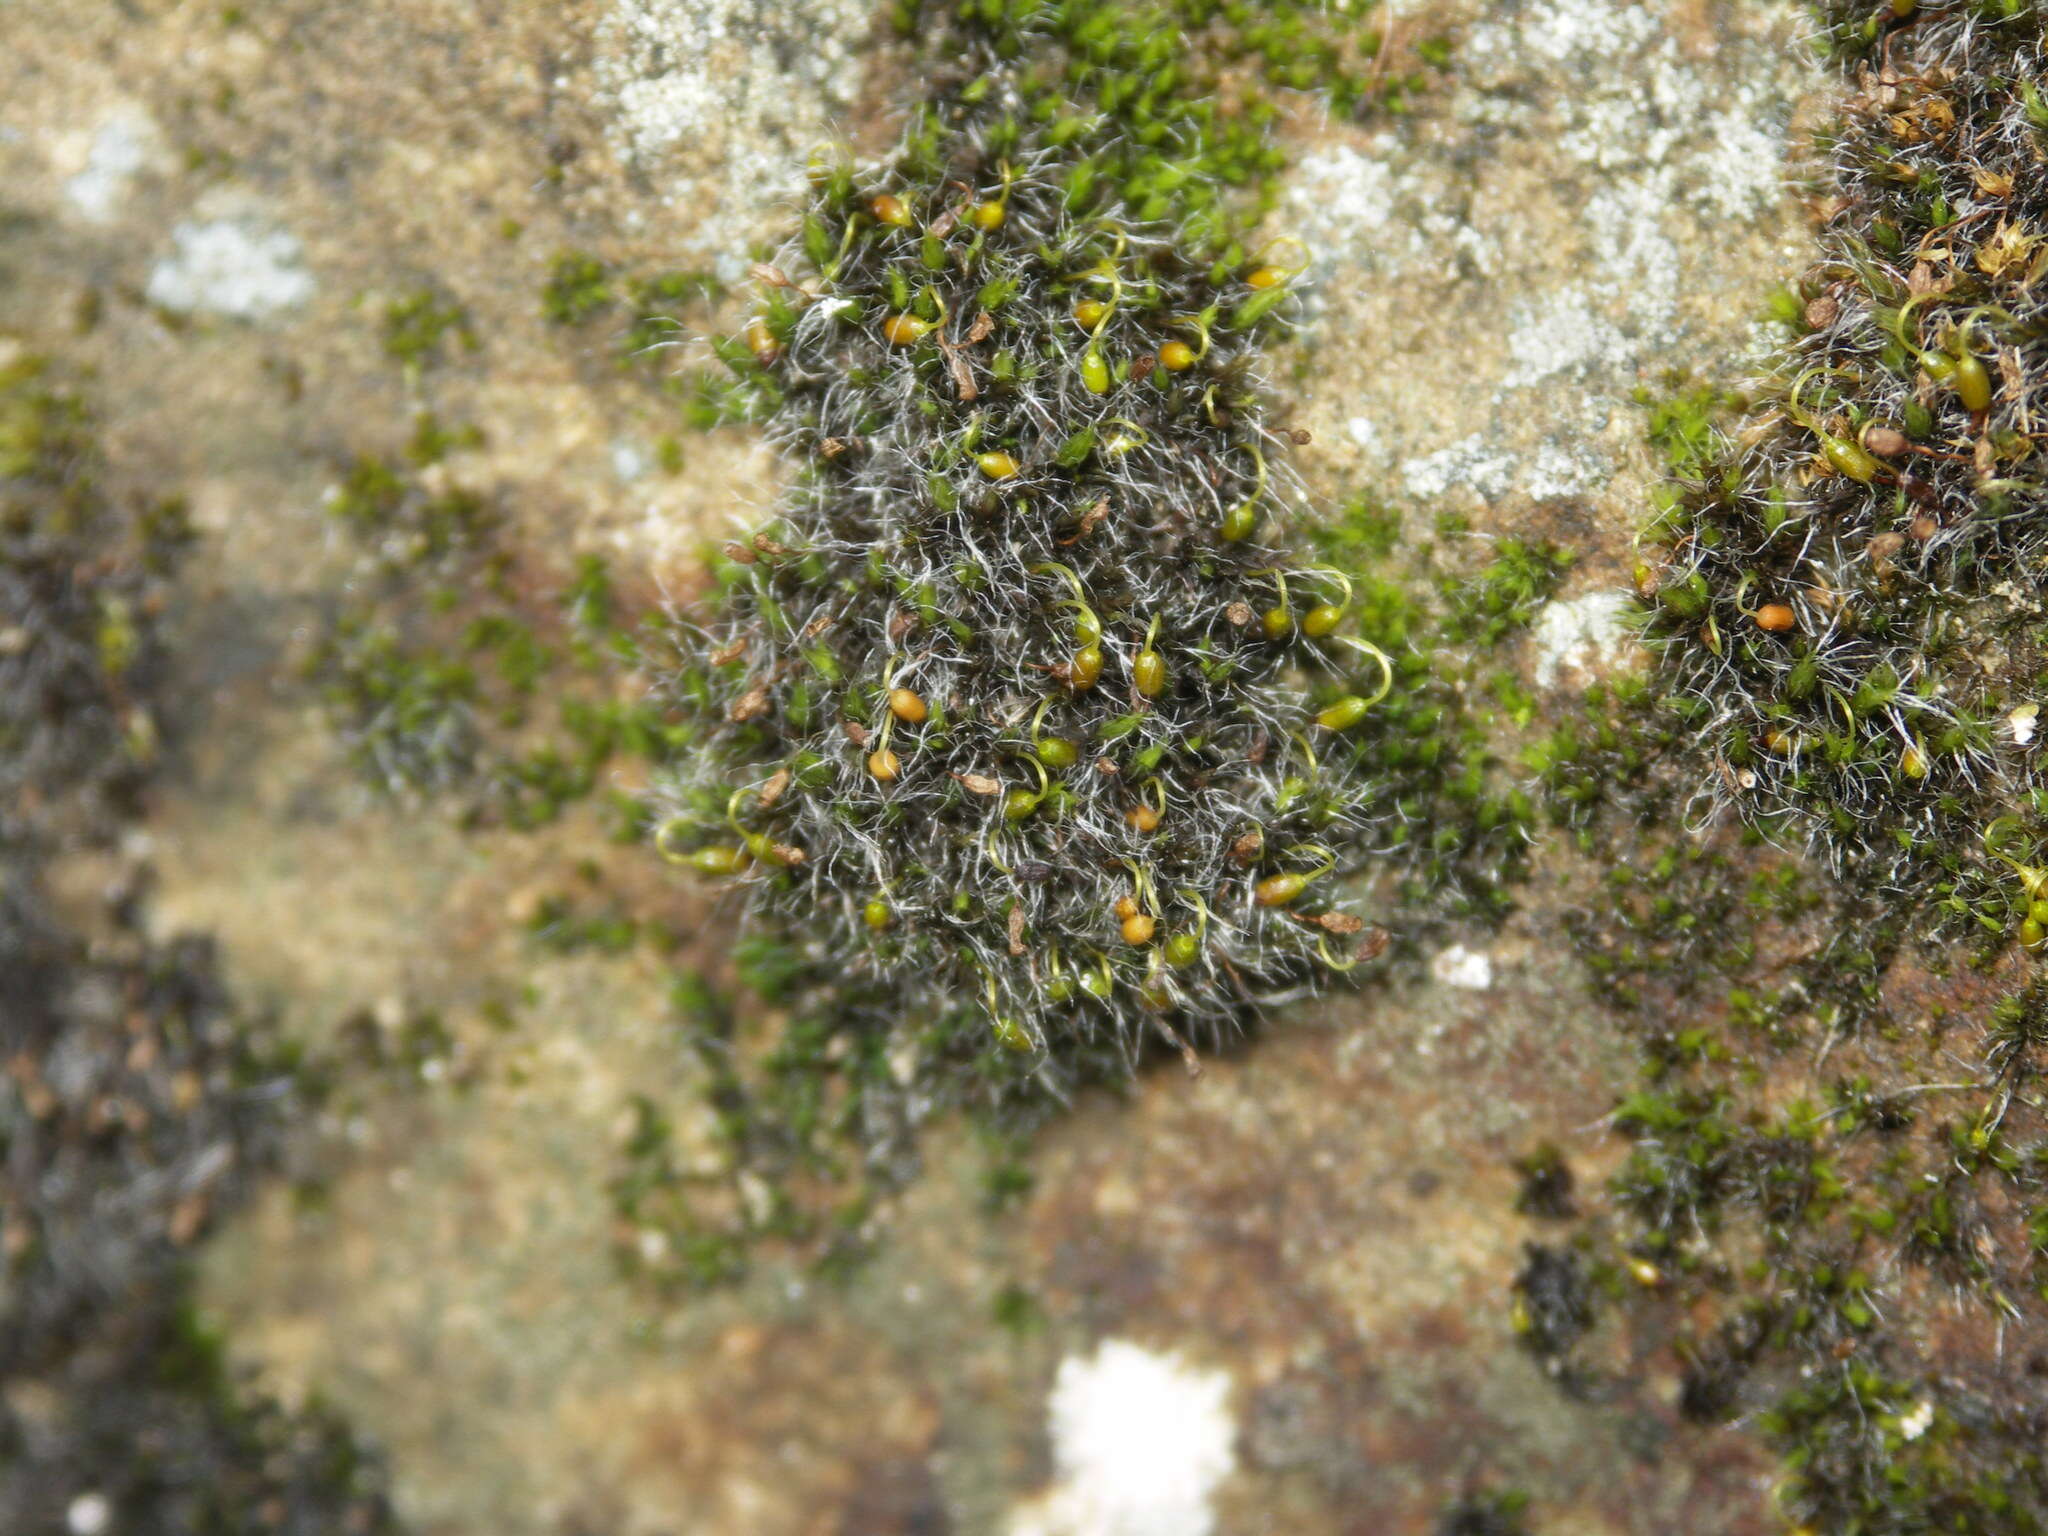 Image of pulvinate dry rock moss